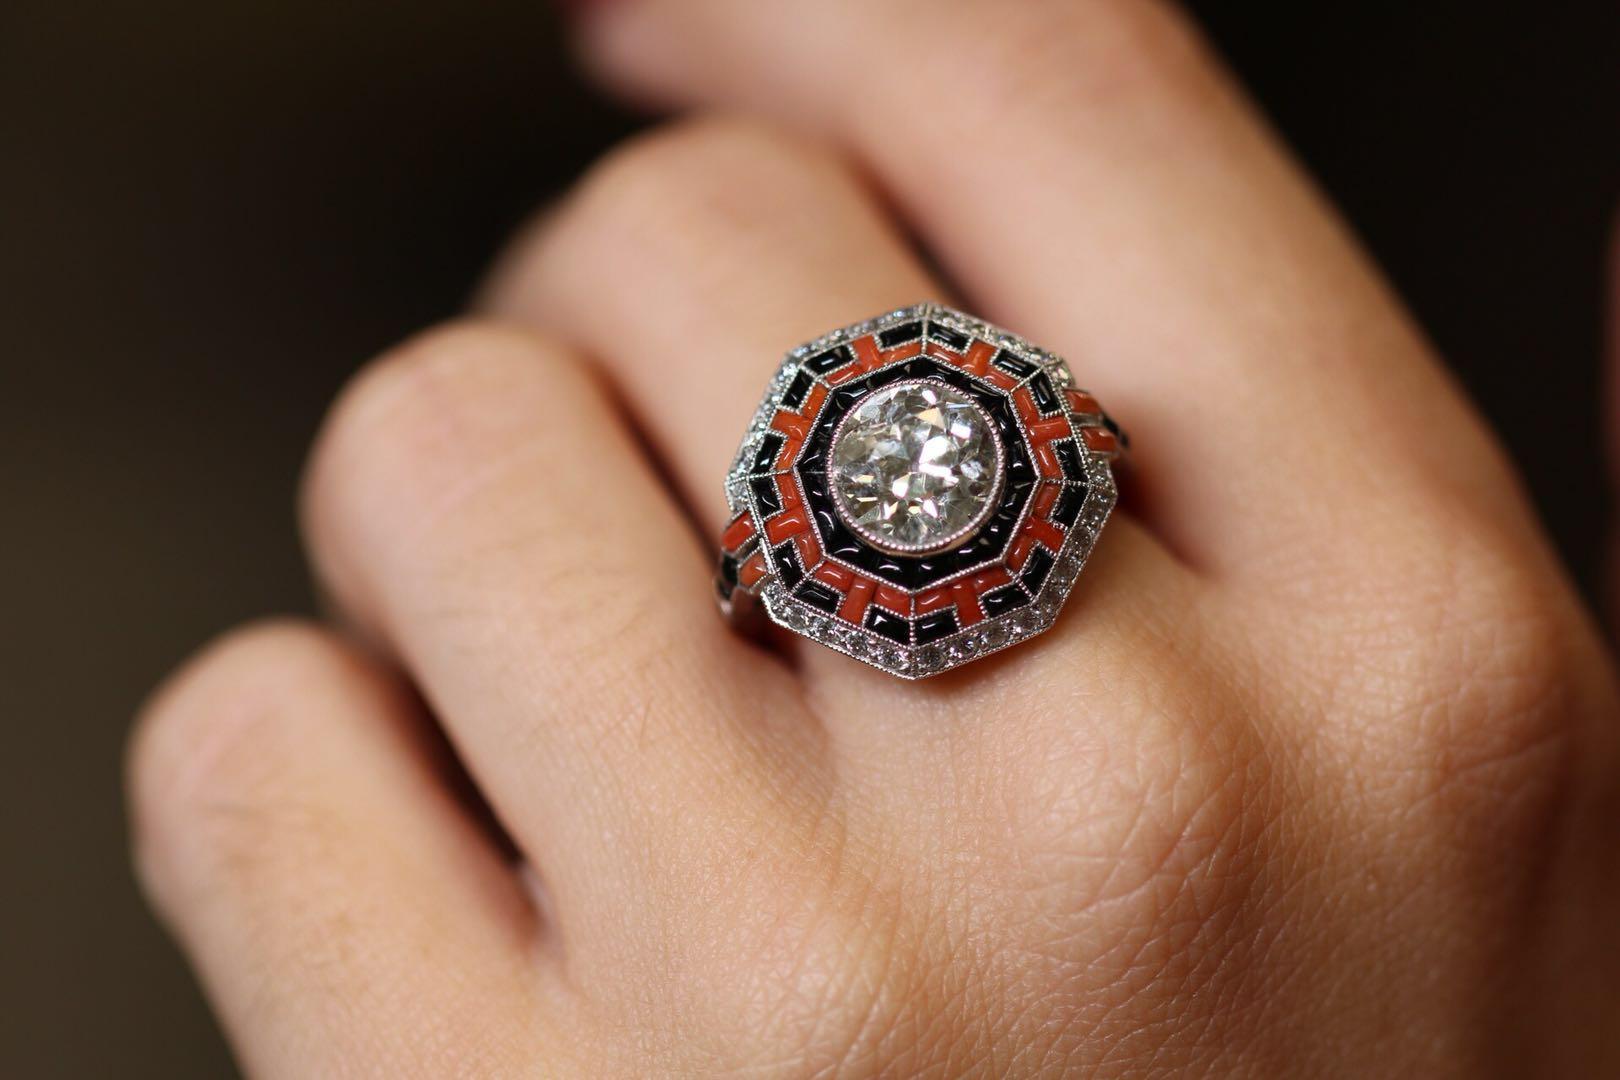 This ring captures the Art Deco period so well. The geometrical design centring on a large 2.23 carat old European cut diamond. The mix of coral and onyx pulls all your attention into the detailing of the work - like a micro mosaic maze.

A further